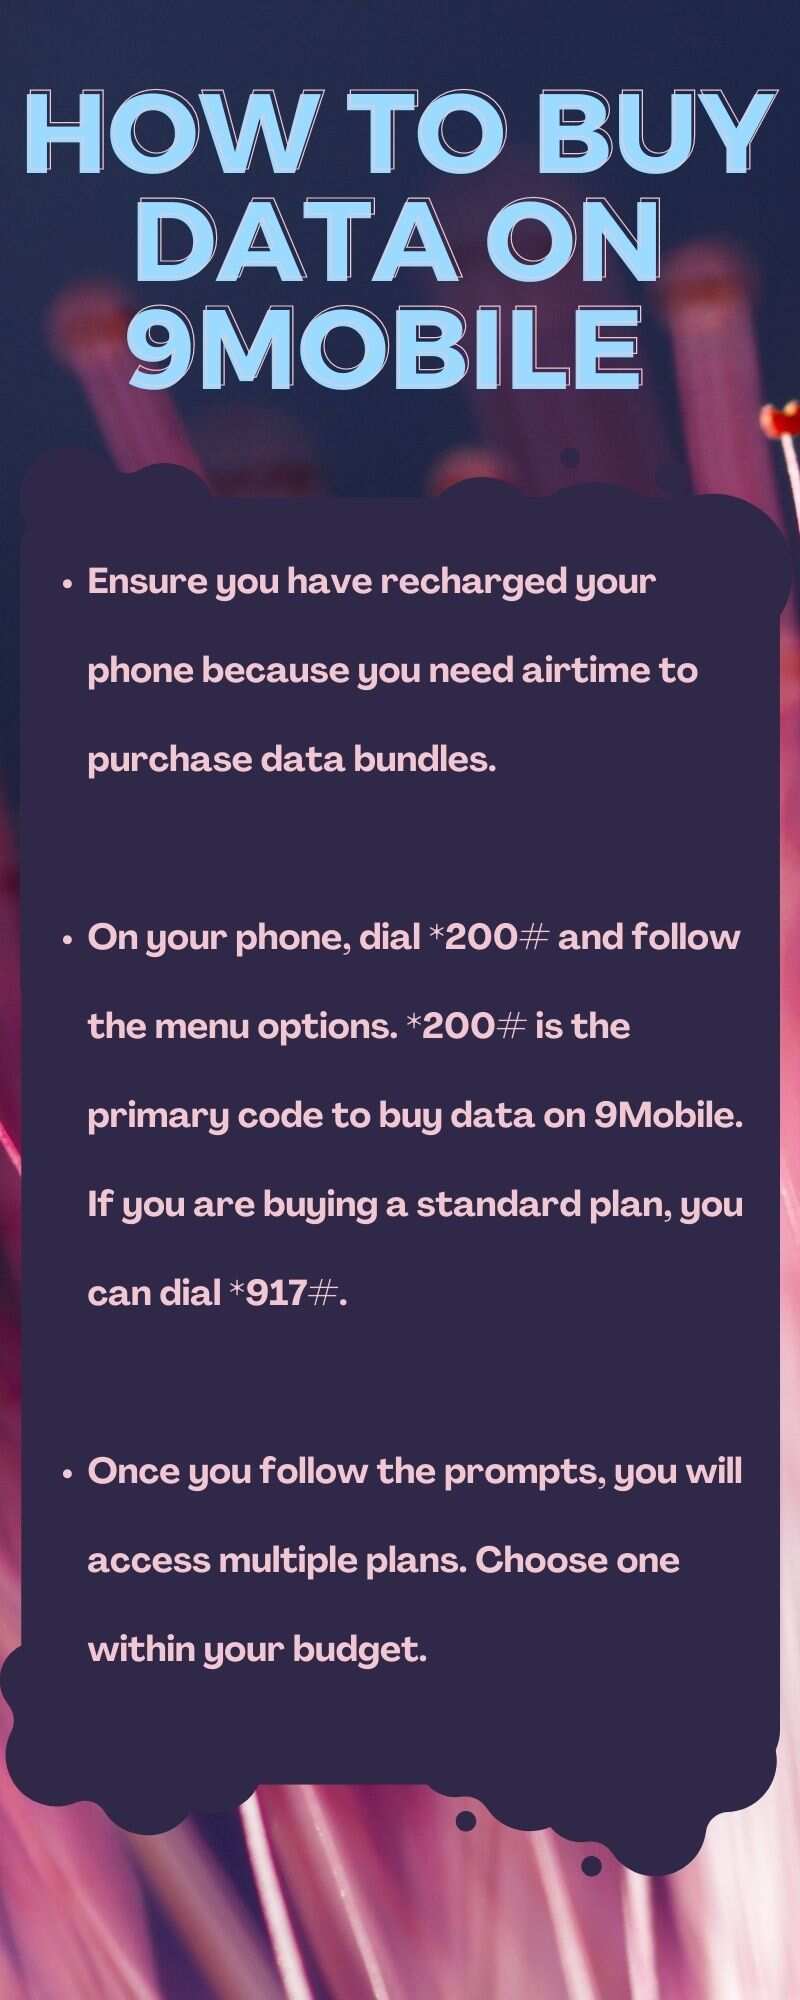 How to buy data on 9Mobile